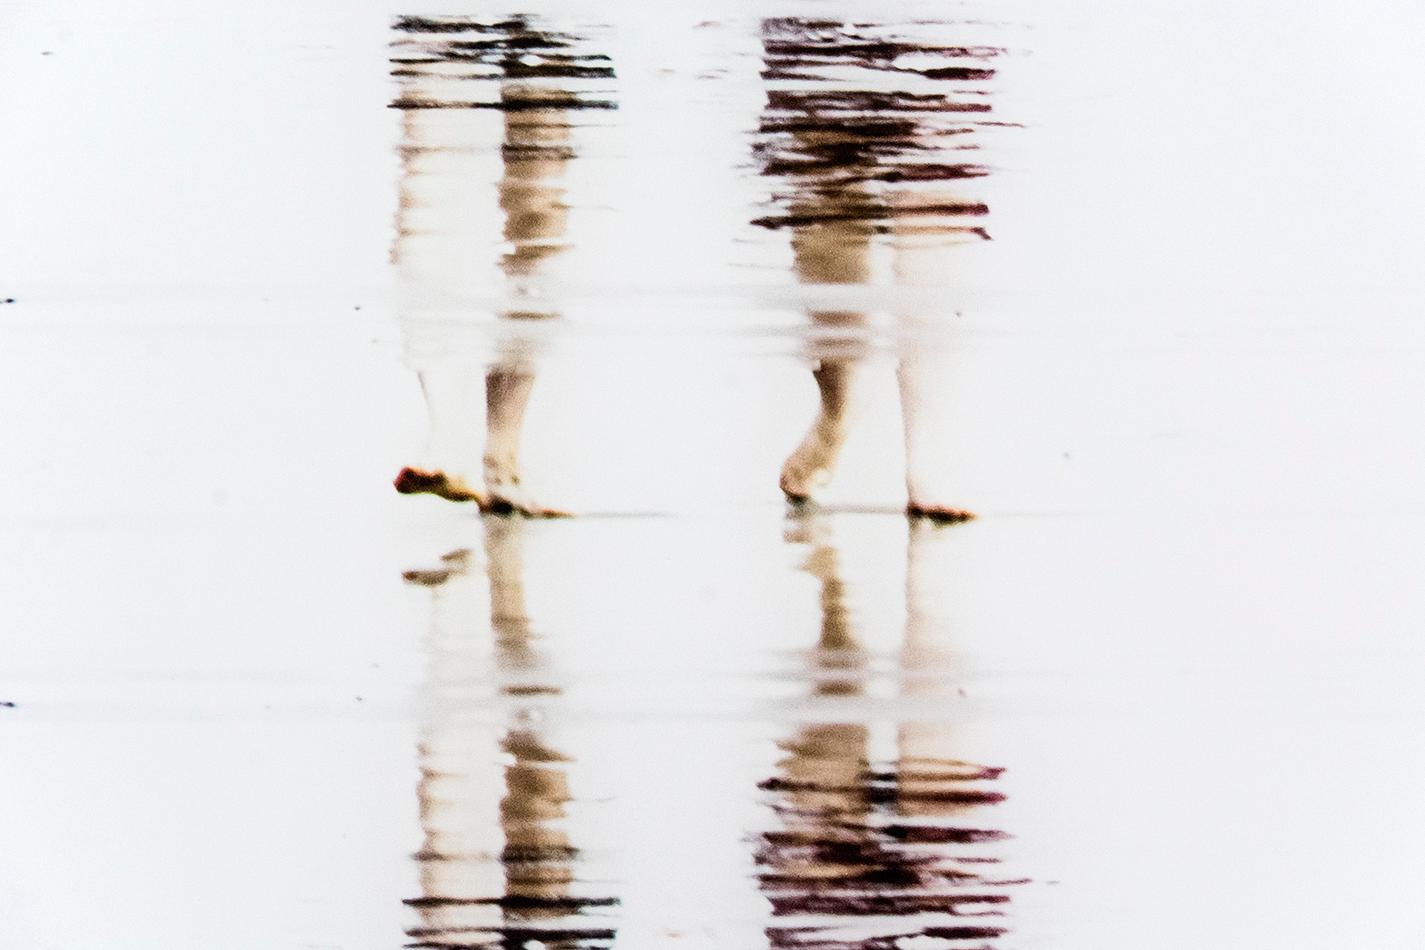 Duplication - white, pink, abstract figurative, landscape, photography on dibond - Photograph by Mark Bartkiw